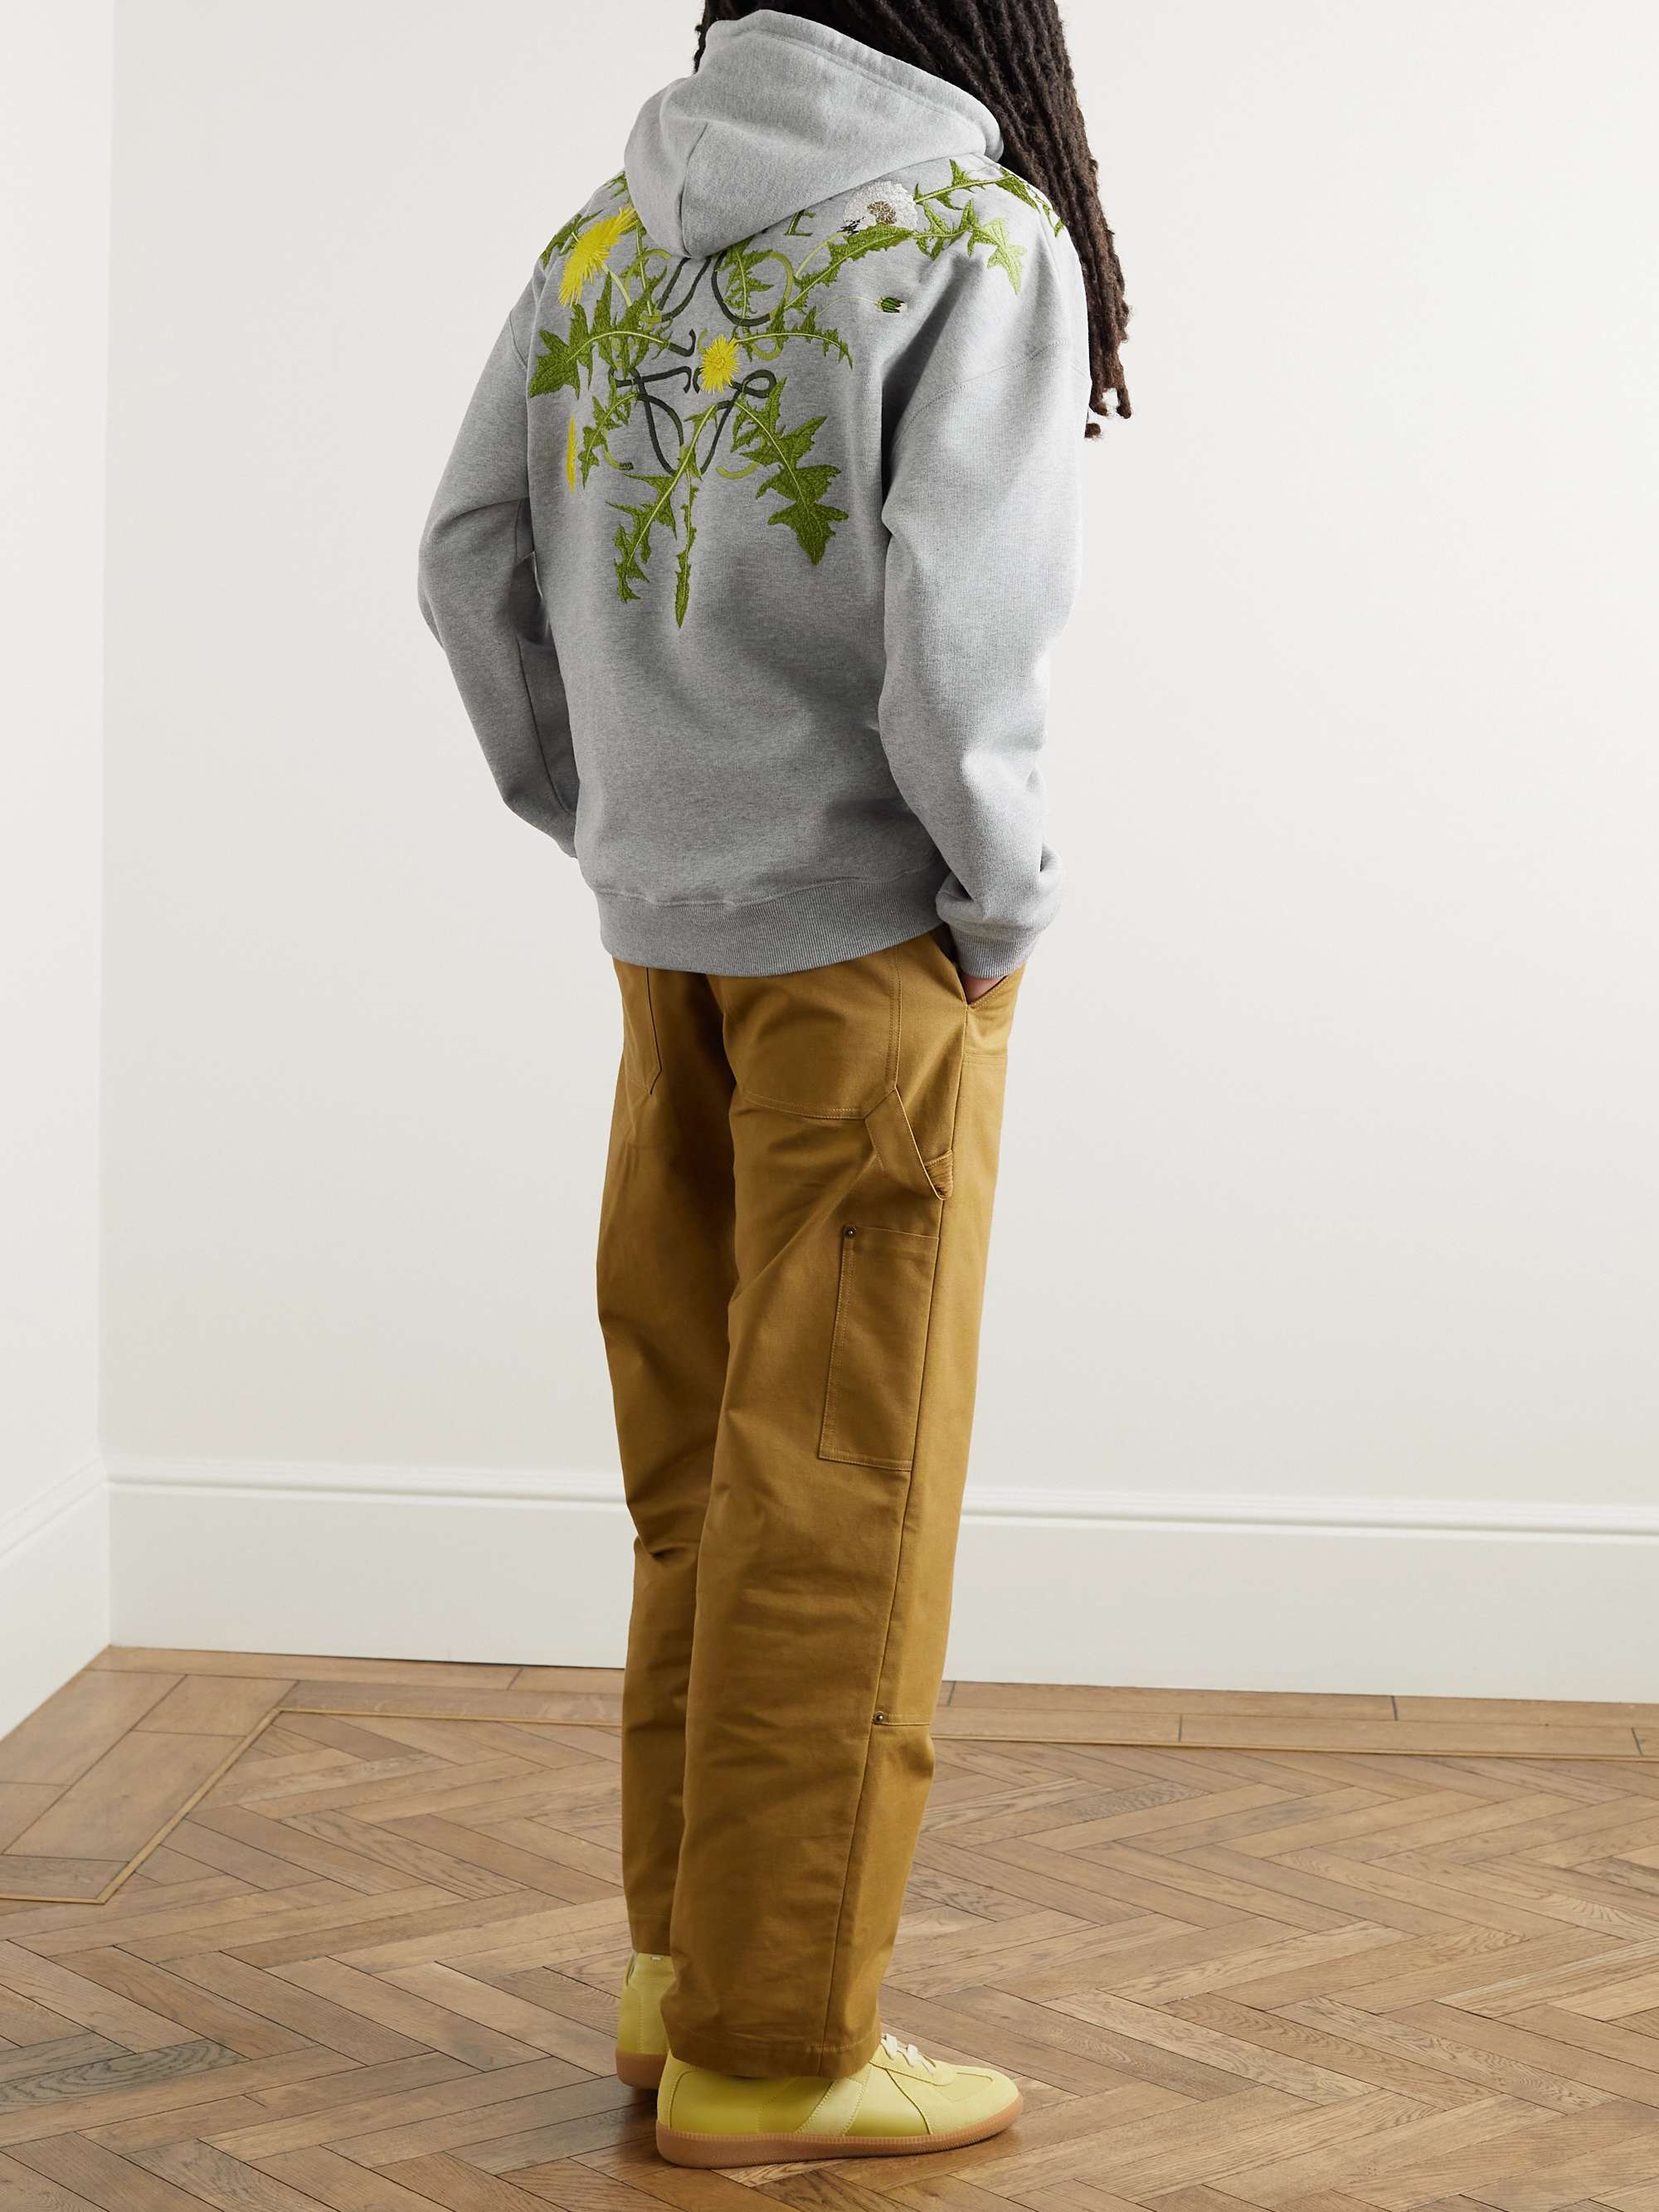 LOEWE Anagram Flowers Embroidered Cotton-Jersey Hoodie